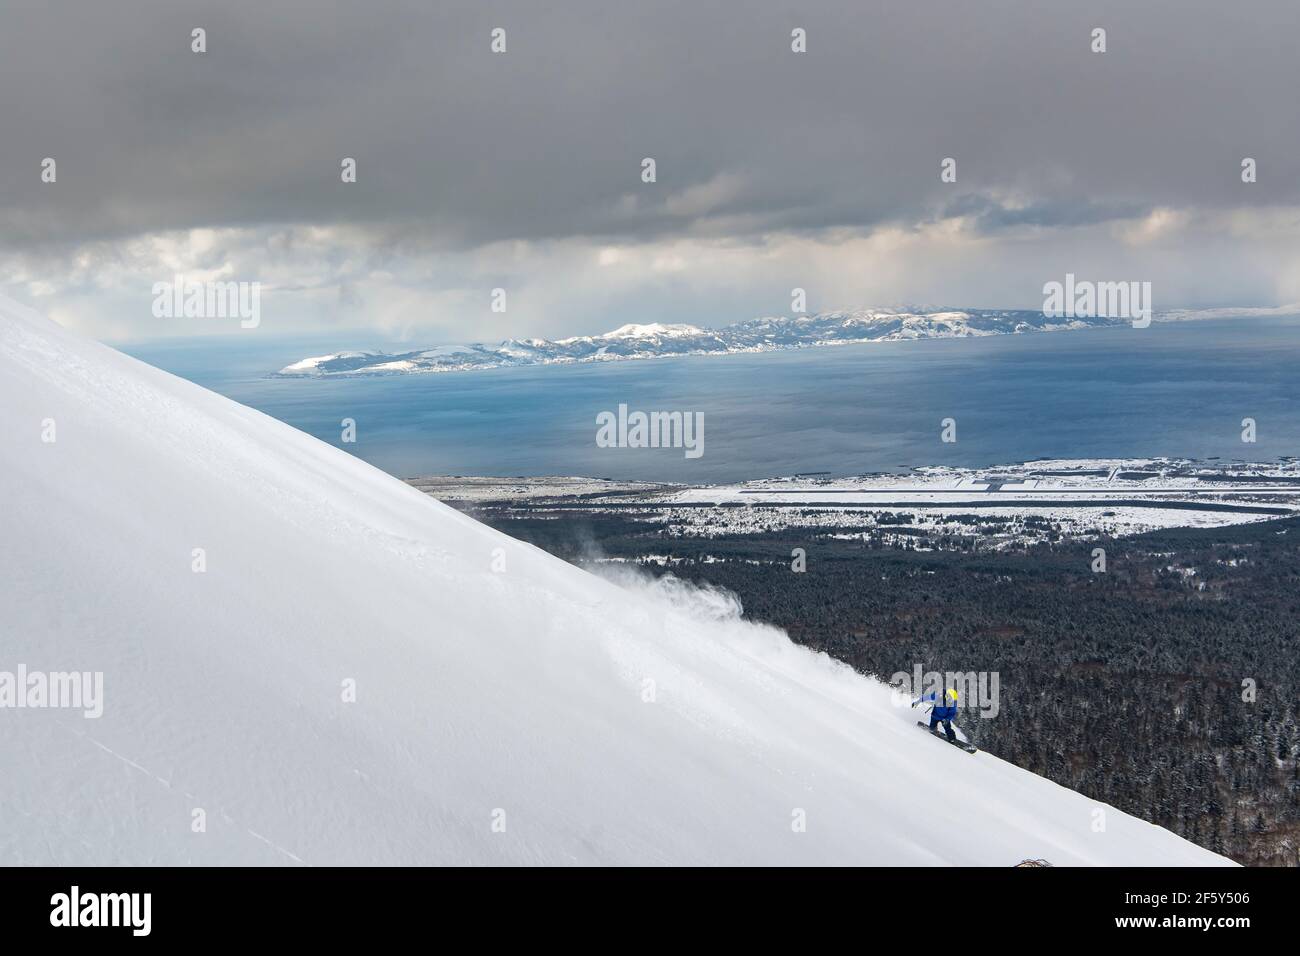 Person snowboarding on slope of snowcapped mountain against sky during winter vacation Stock Photo